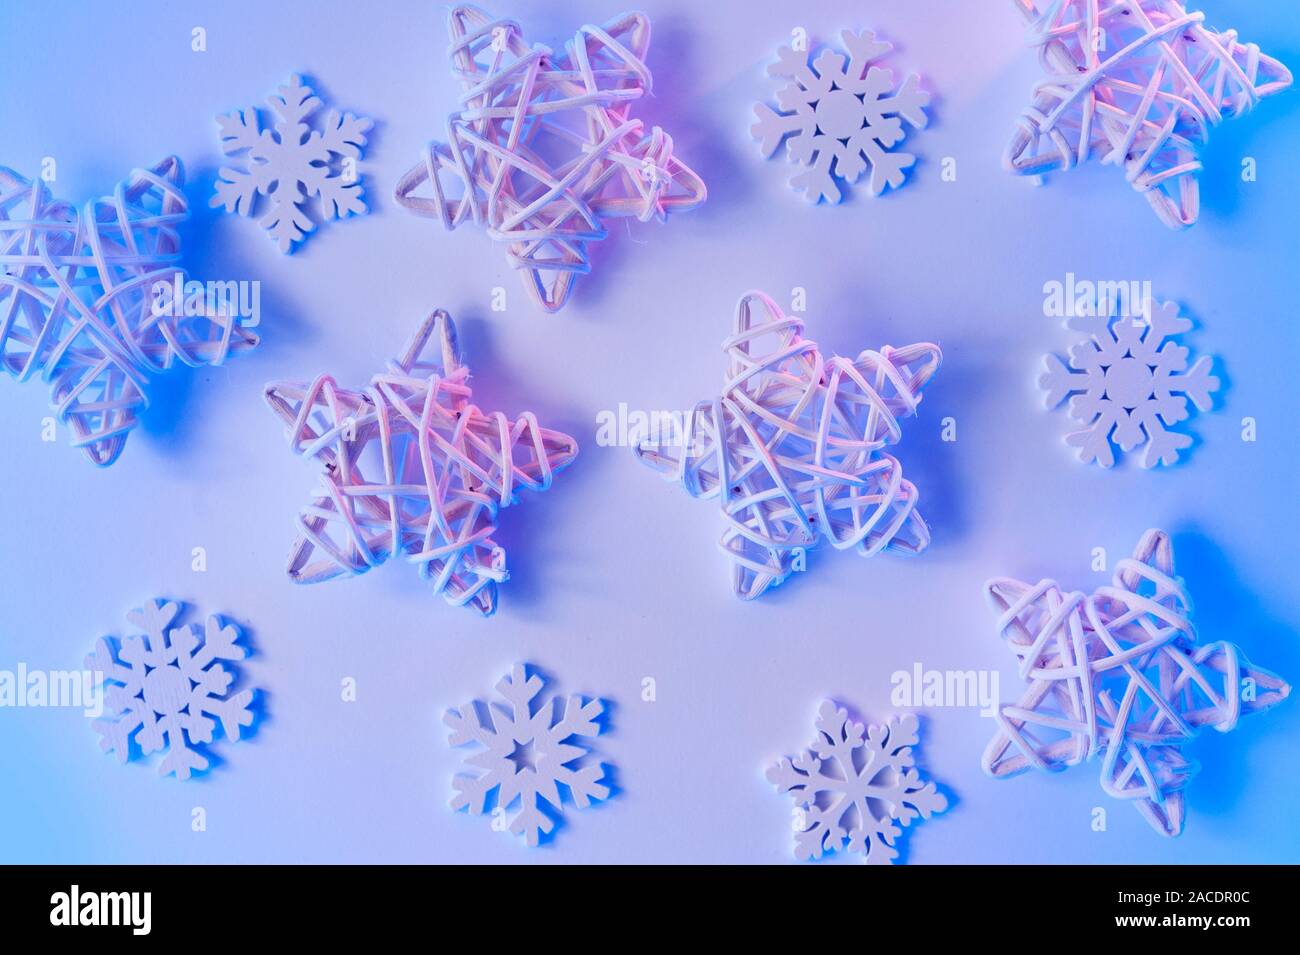 Christmas blue neon background with wooden stars and snowflakes. Holiday greeting card design with gradient lights Stock Photo